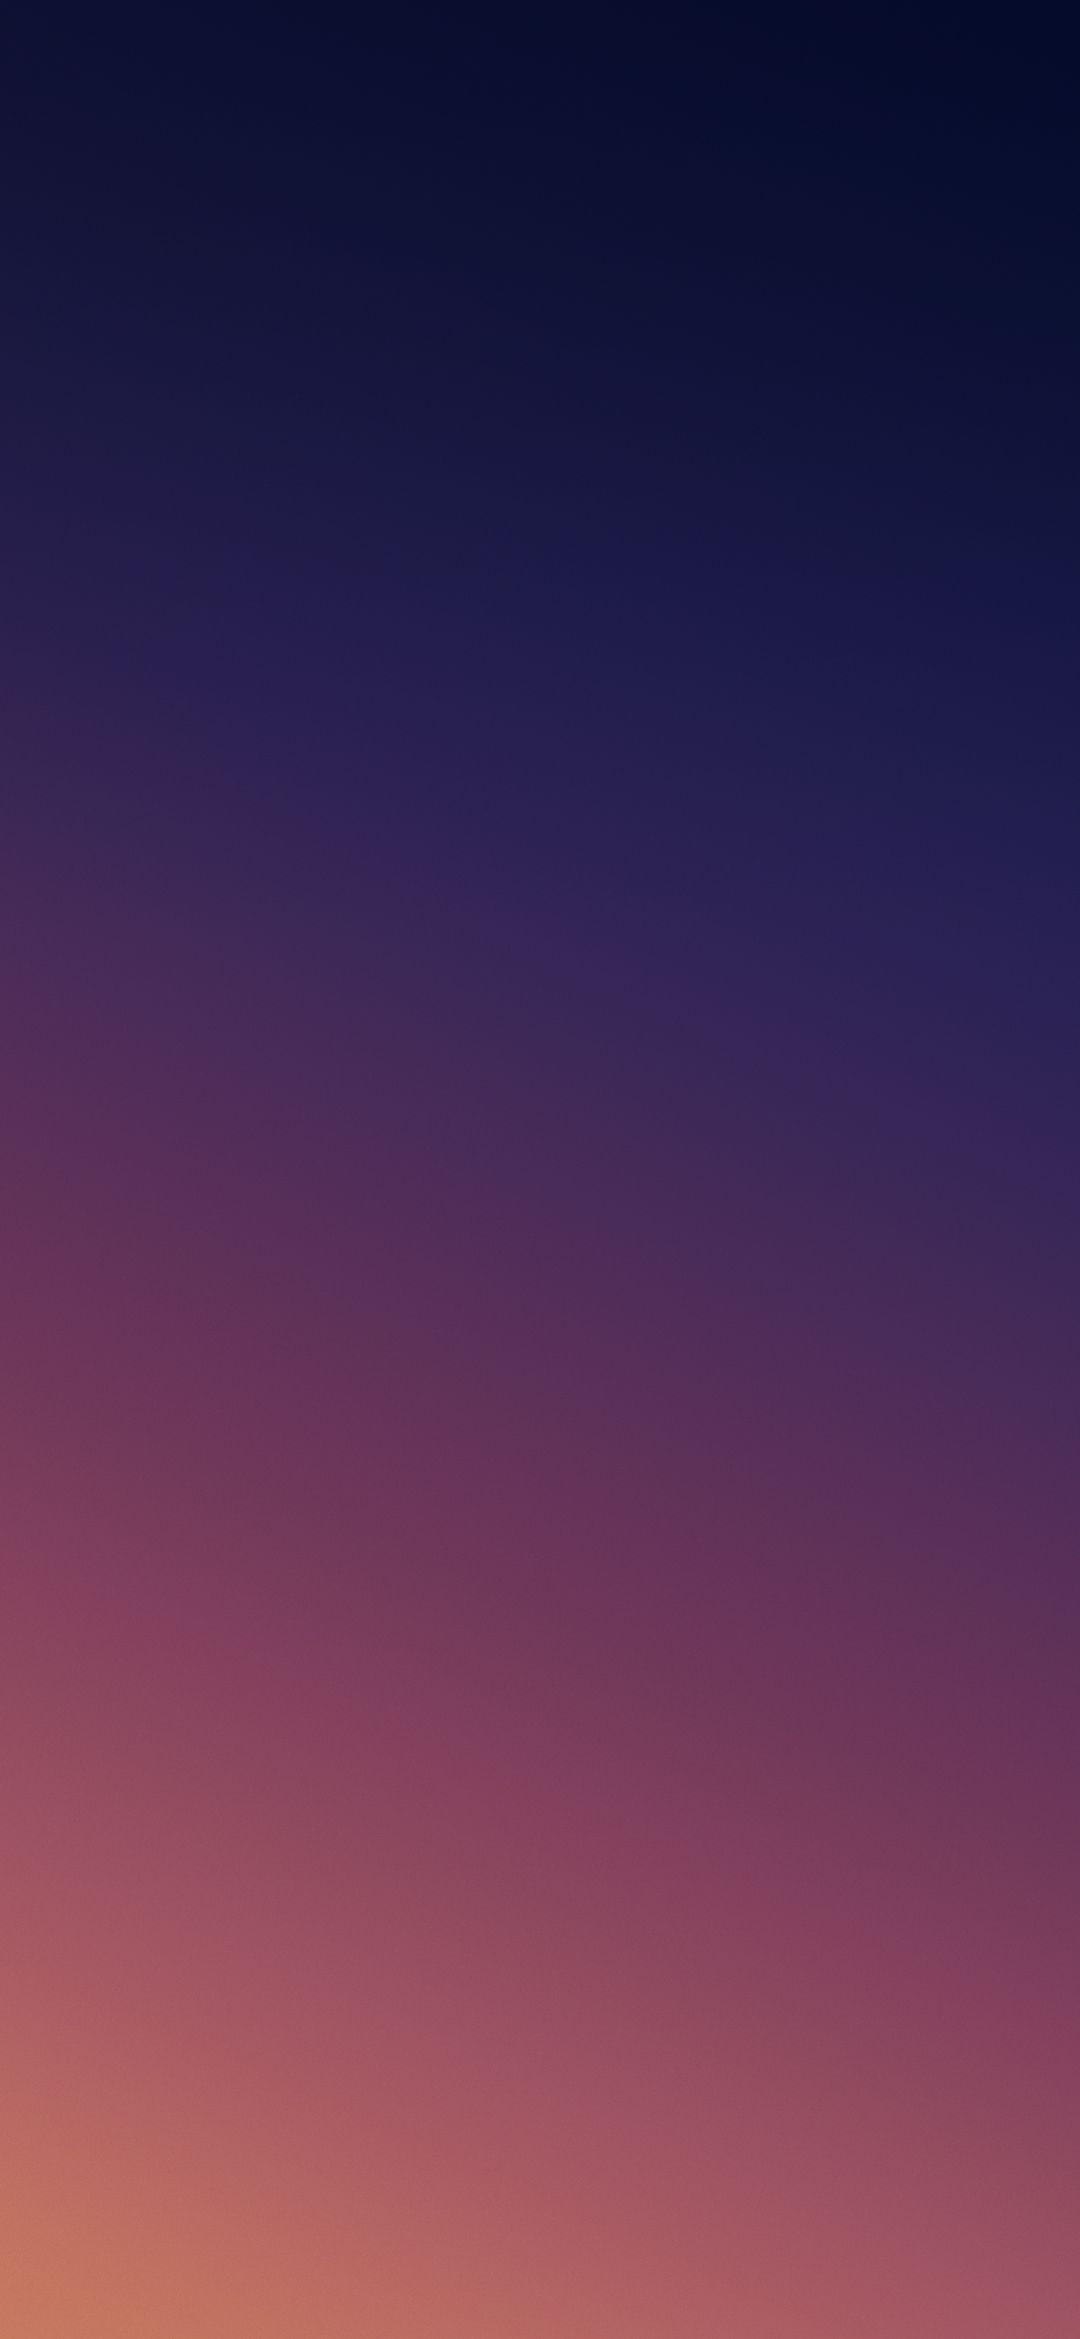 Official Redmi Note Wallpaper Stock Galaxy S8